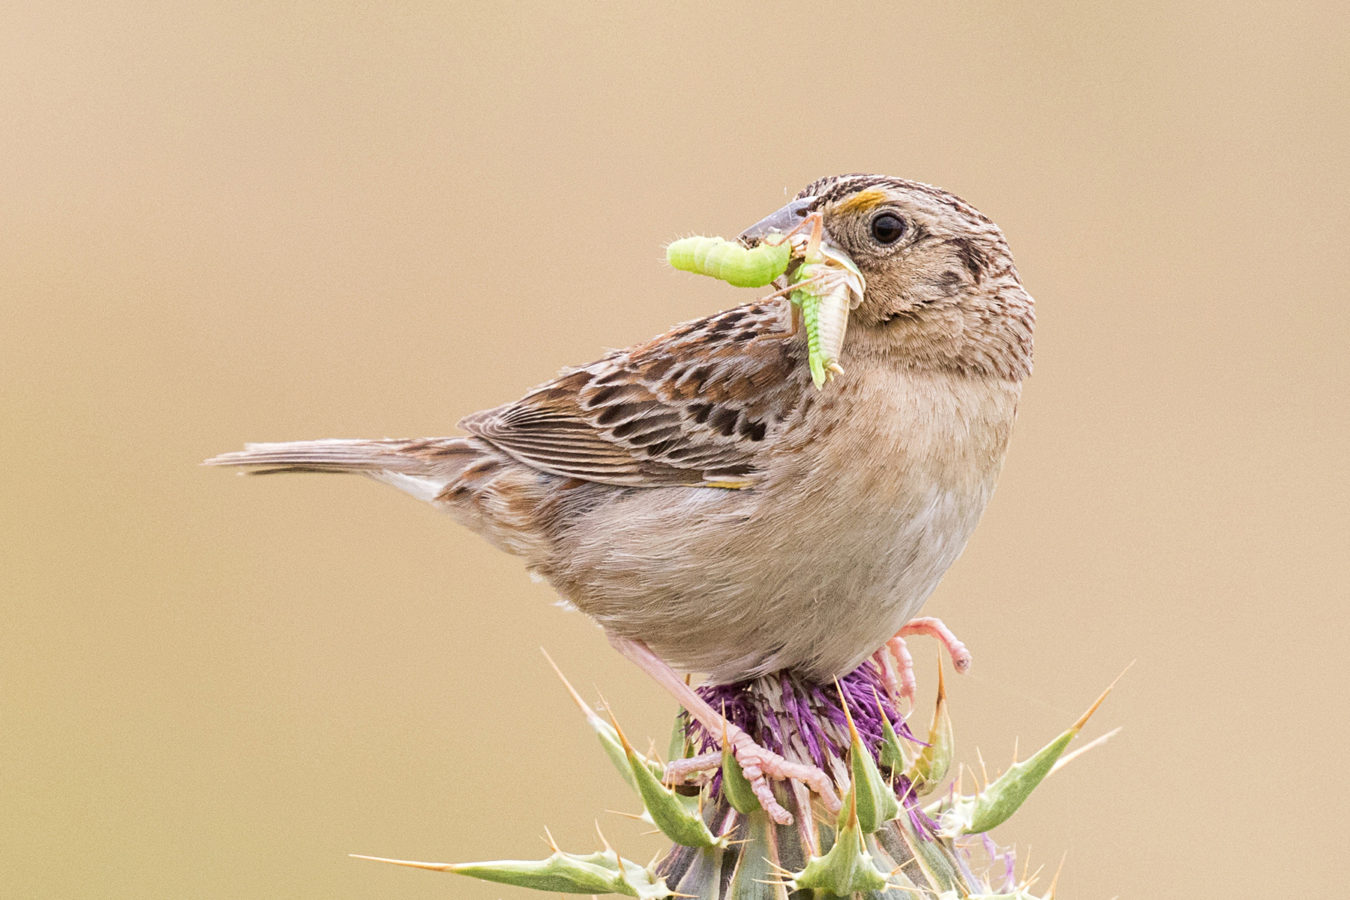 brown sparrow with green insects in beak and perched on dried thistle flower